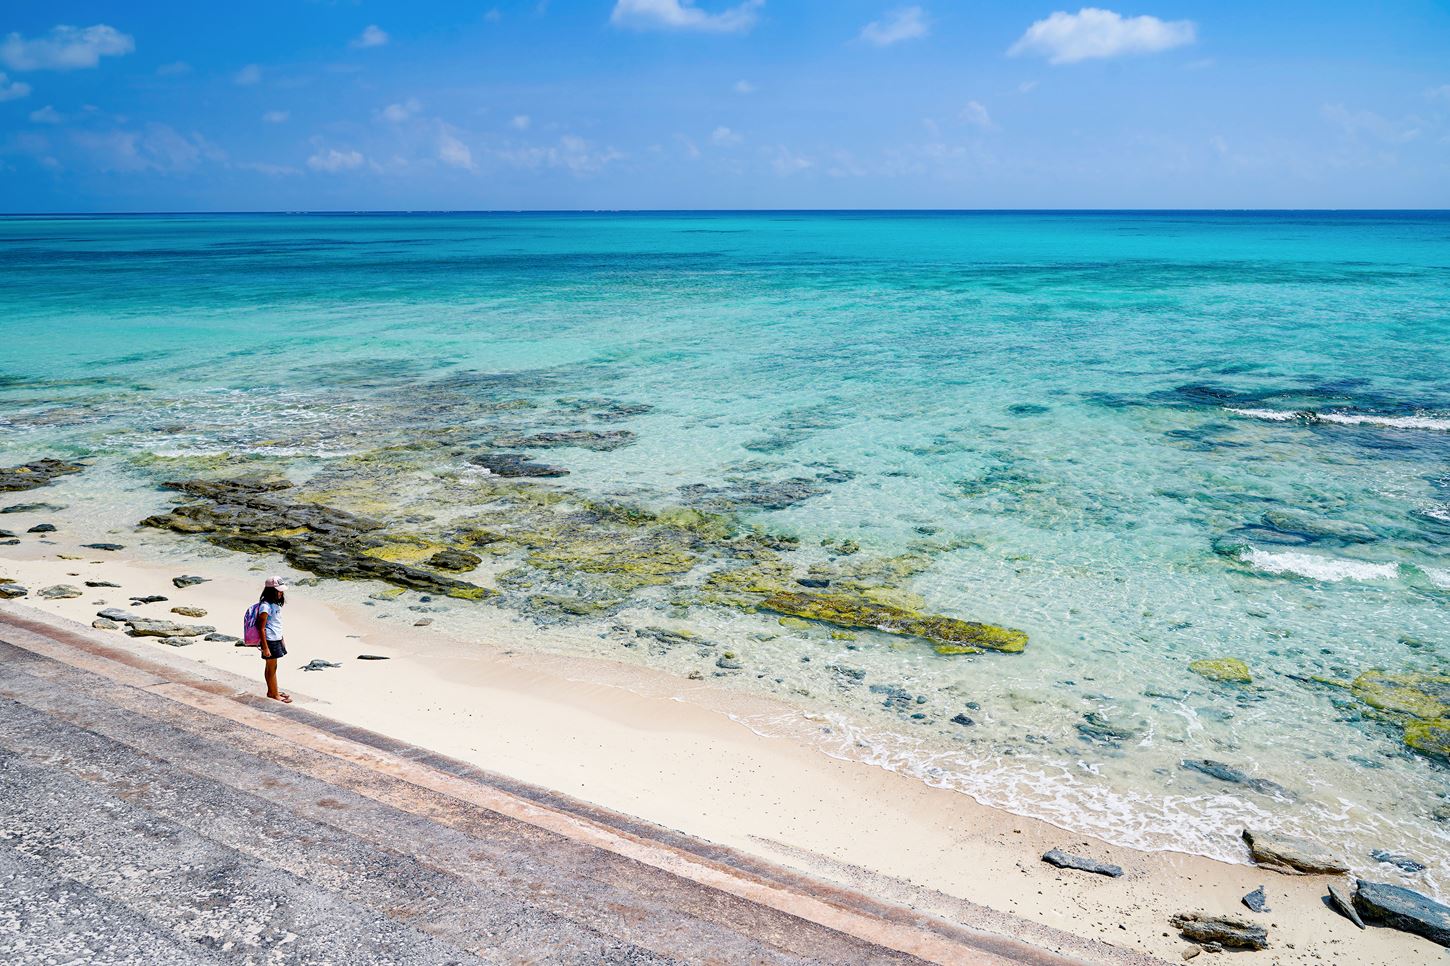 Sightseeing scenery that simply shows the weather and clothes in Okinawa in September4